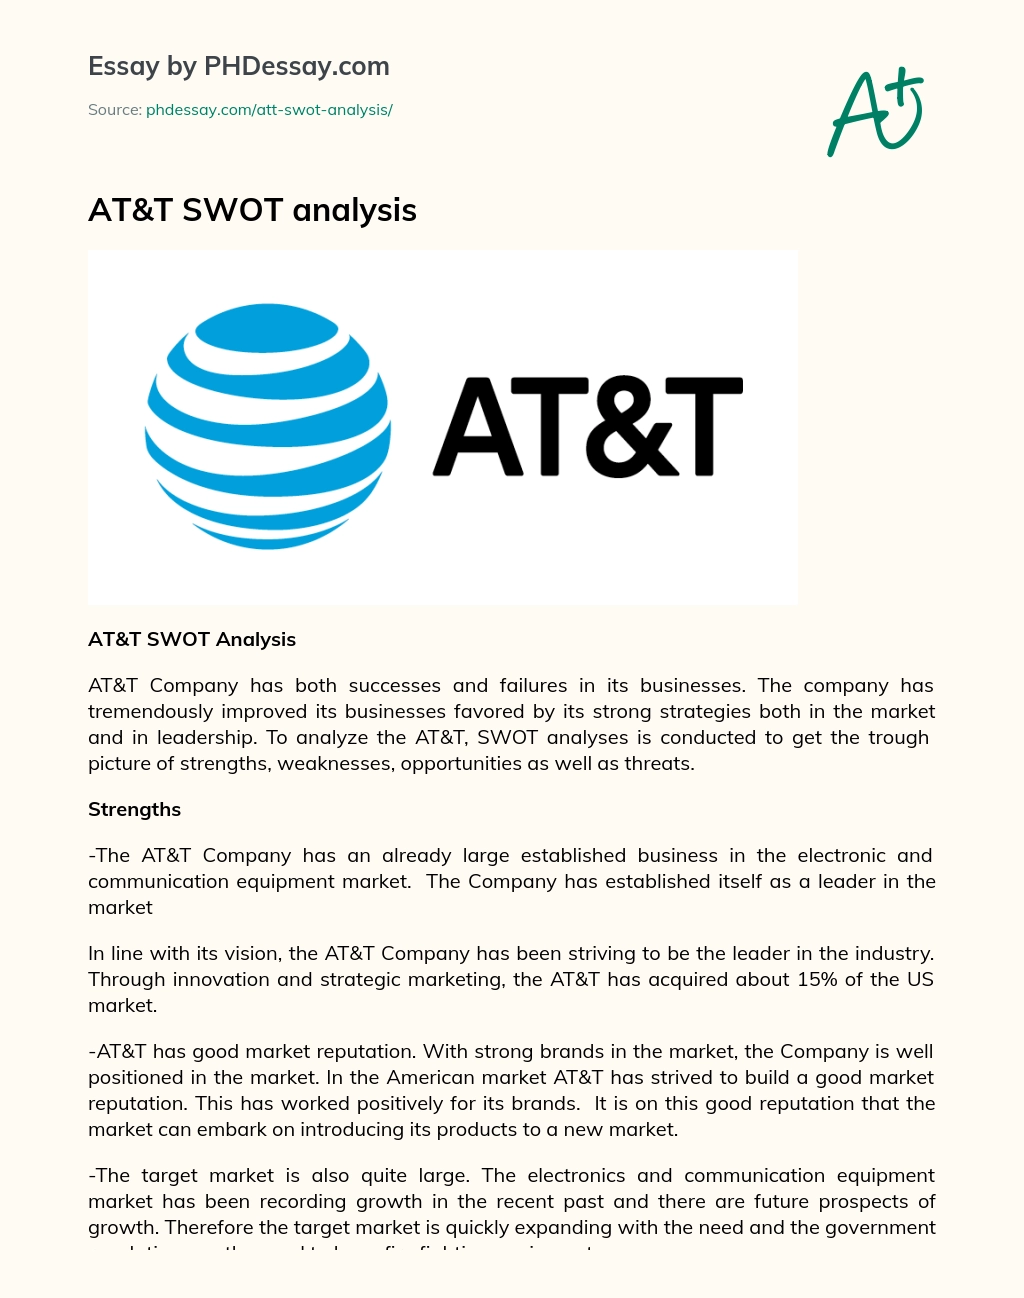 AT&T SWOT analysis essay